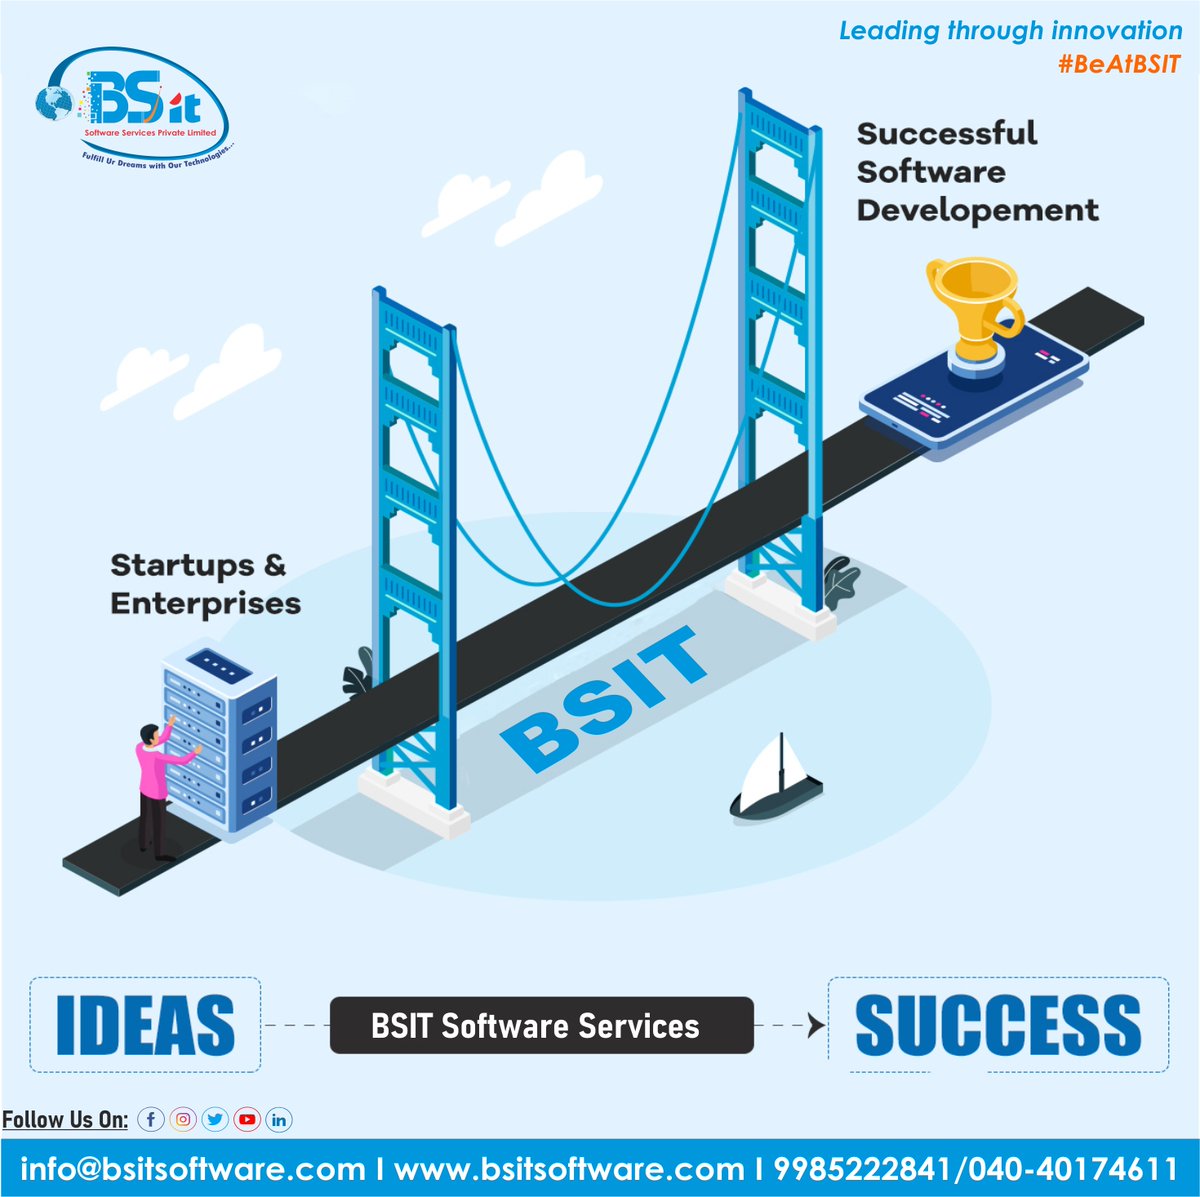 We have great Ideas to grow your business!
Book An Appointment to know them

#BhanuChandarGarigela #SharadaNenavath #bhanuchandargarigela #sharadanenavath #EnterpriseSoftware #DigitalAcceleration #DigitalTransformation #DigitalBusinessTransformation #DigitalAdoption #Software